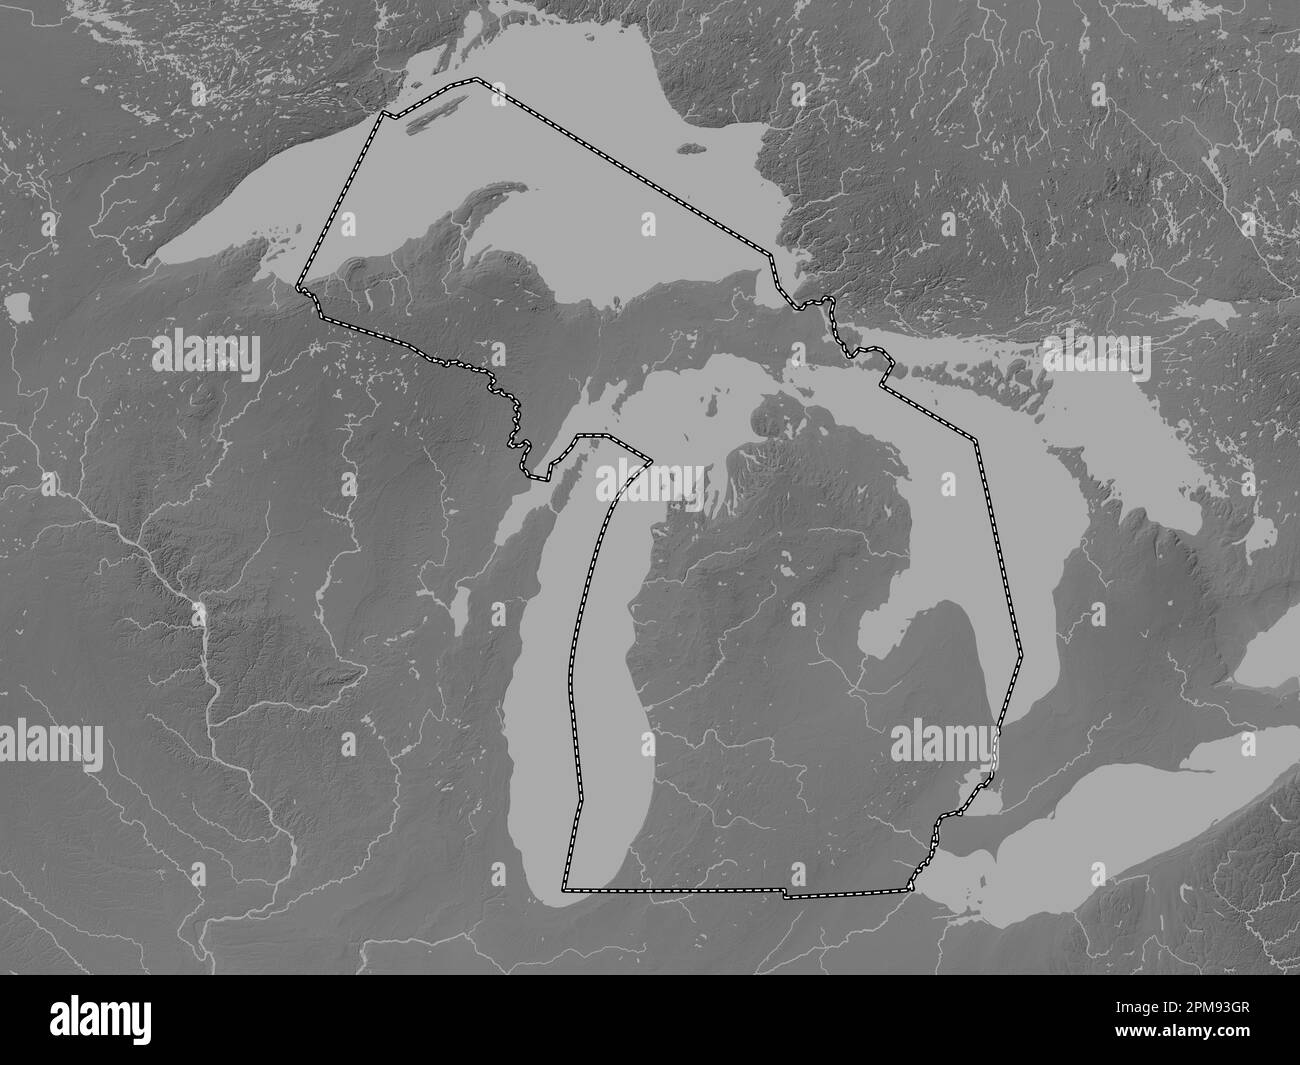 Michigan, state of United States of America. Grayscale elevation map with lakes and rivers Stock Photo